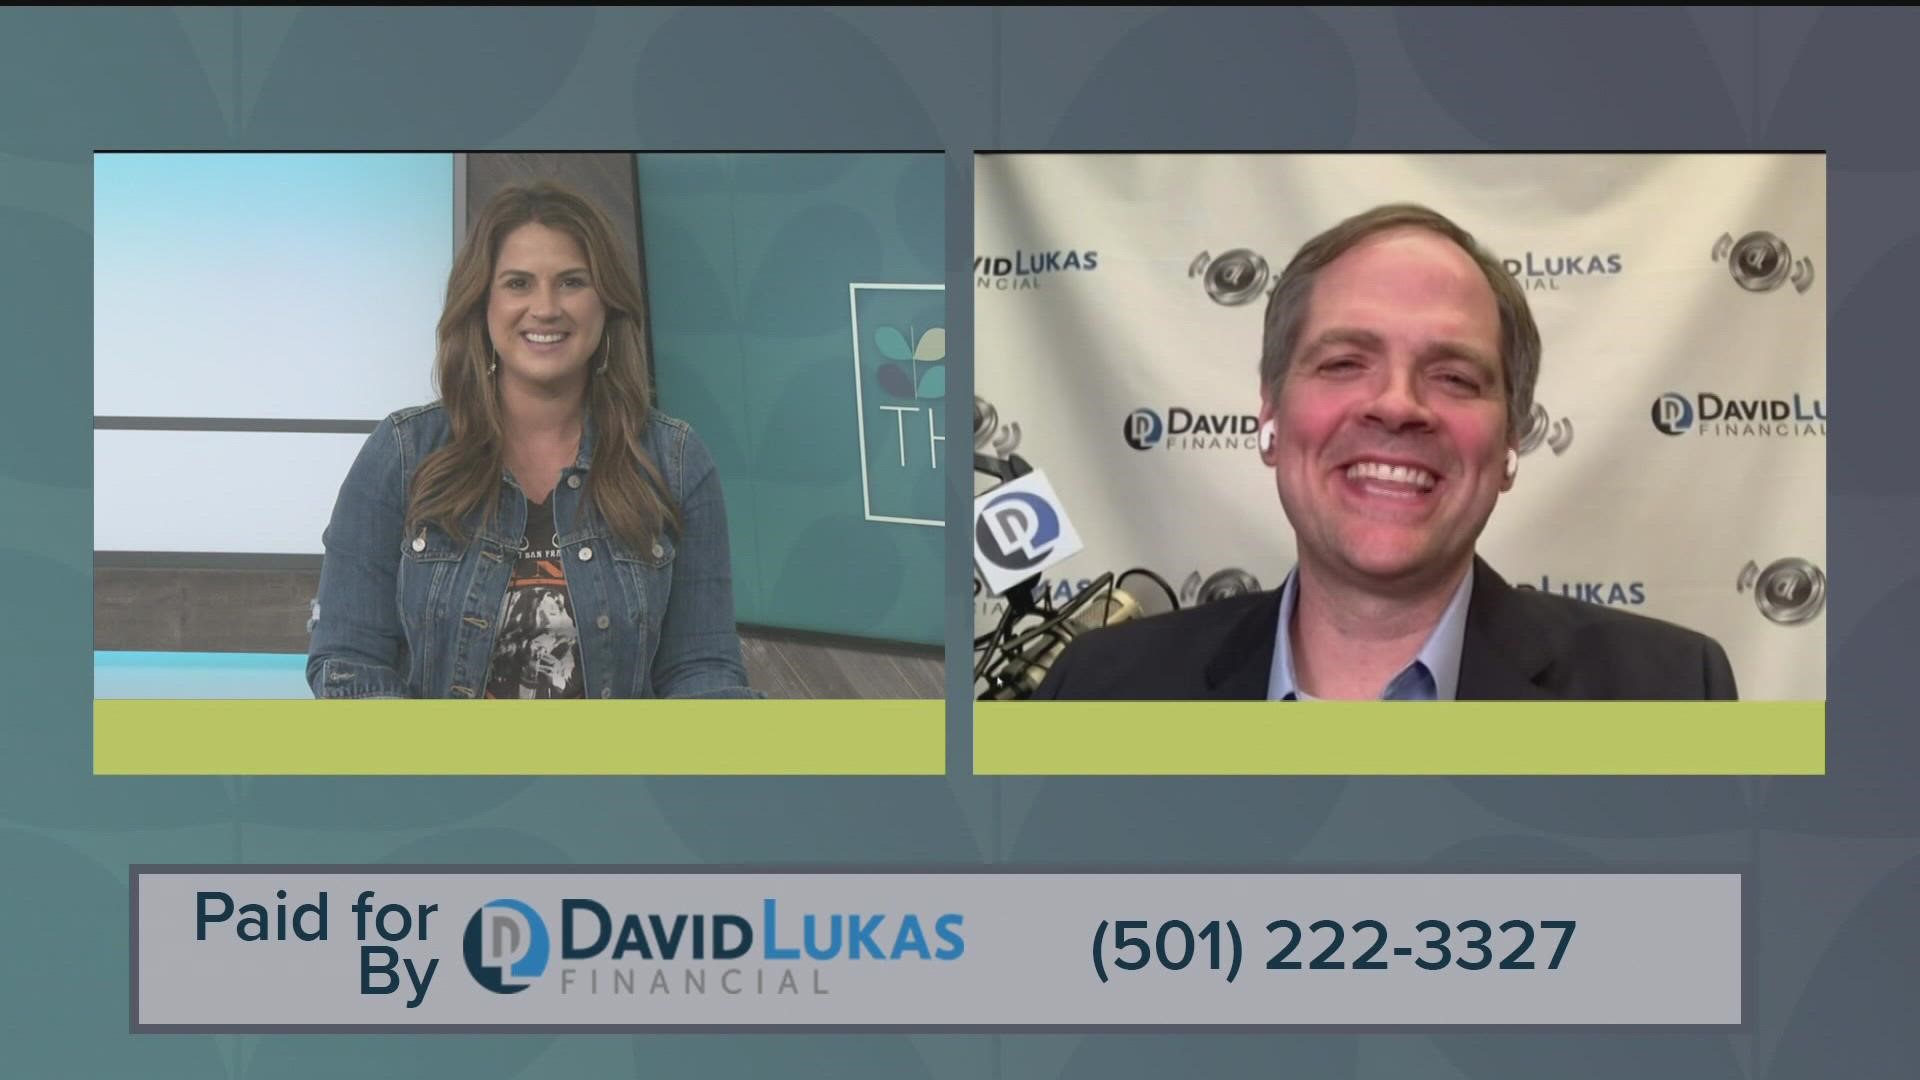 David Lukas shares 3 main concerns for those hoping to retire in the next 5 years. Call (501) 222-3327 to learn about his free retirement tax analysis.